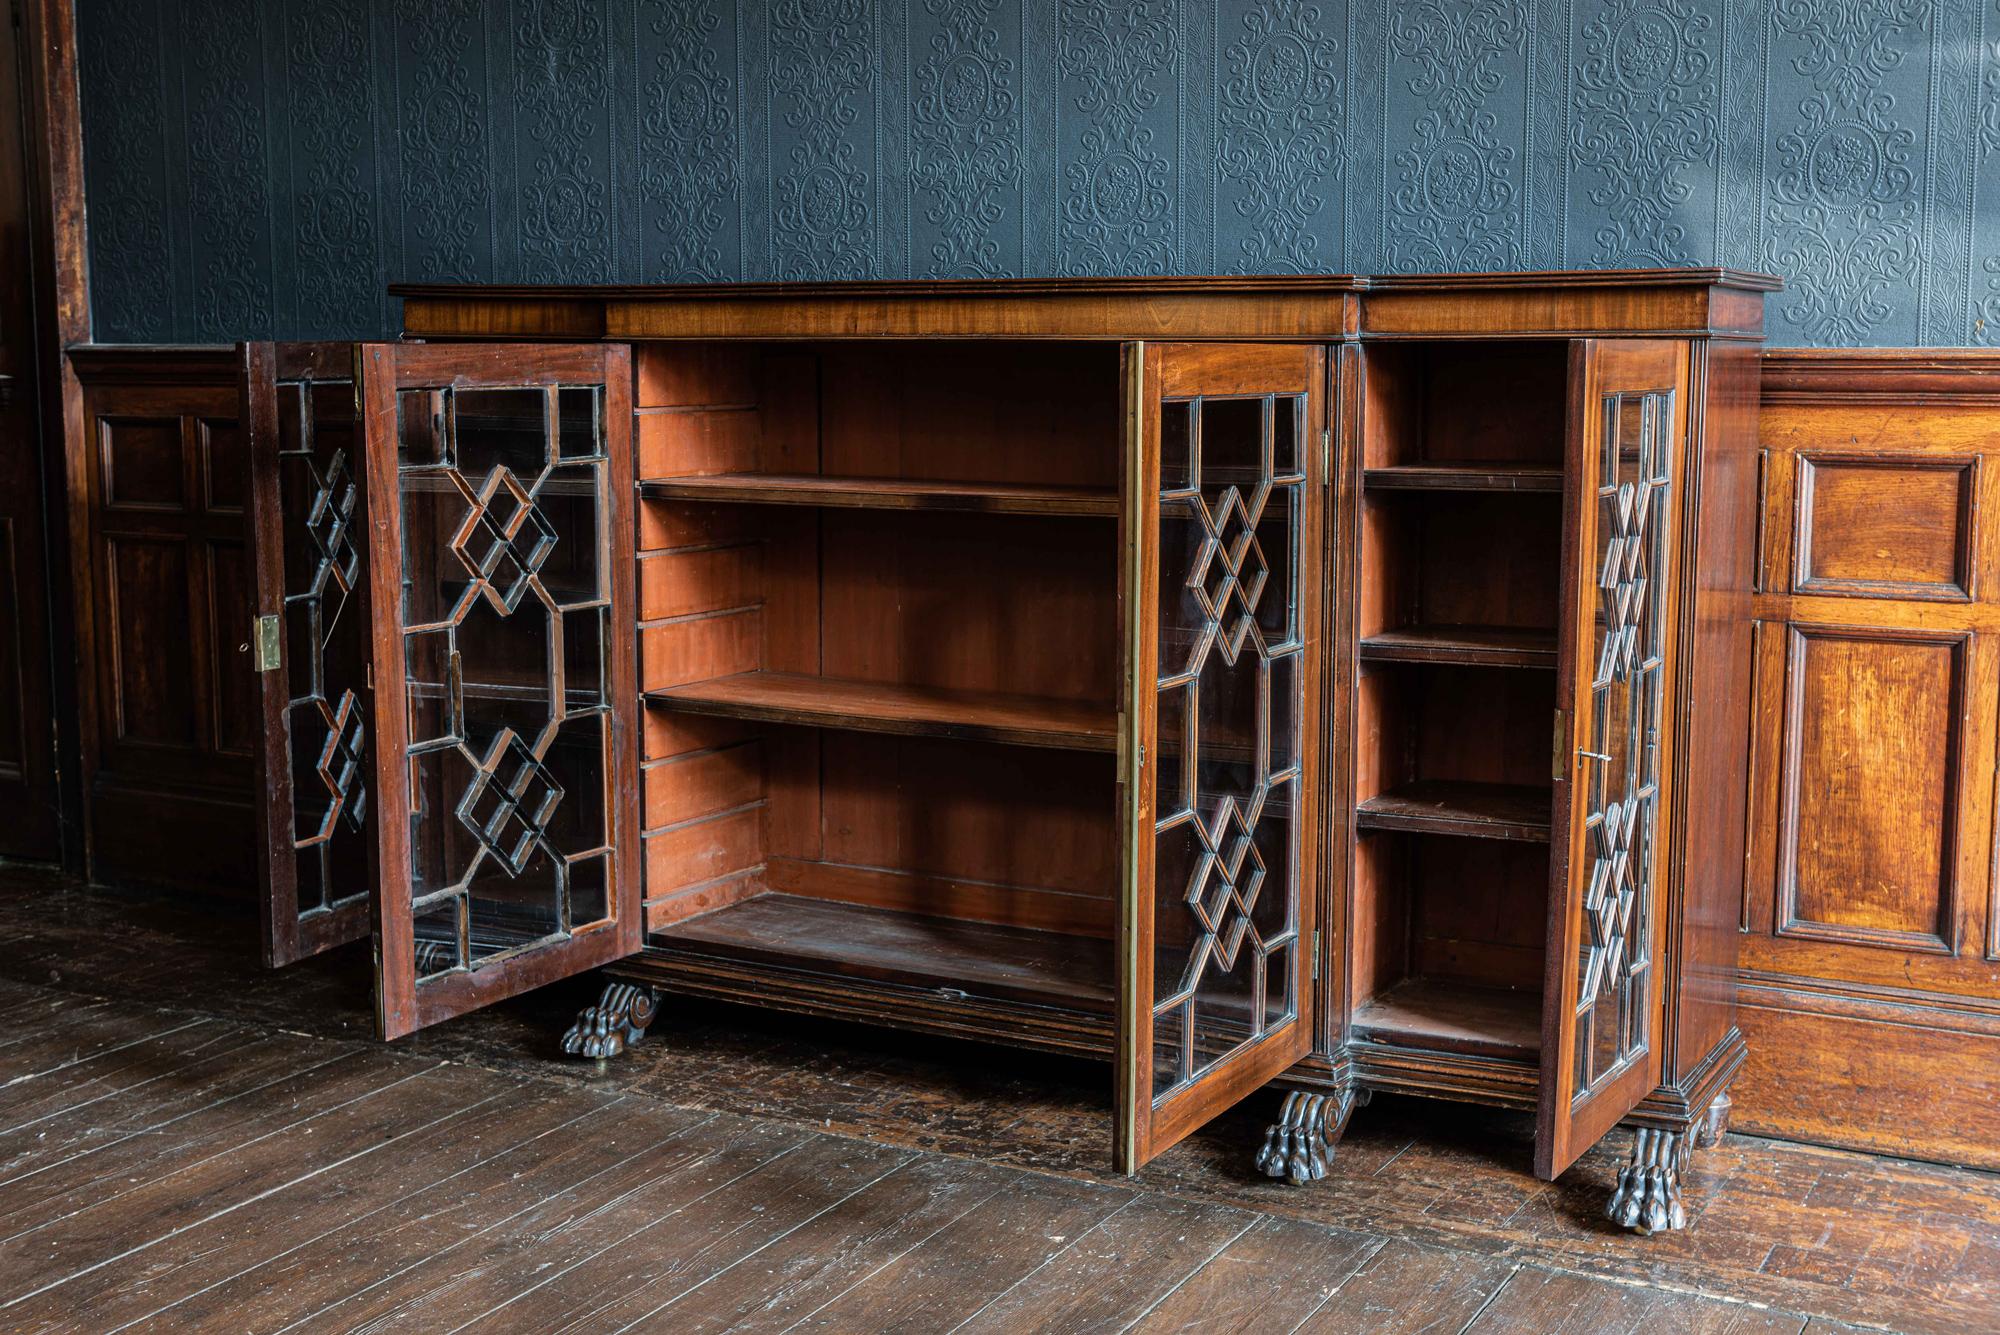 Country house mahogany breakfront bookcase,
circa 1895.

Carved mahogany lion paw feet with solid brass caster wheels under paws. Slim astragal glazing bars with brass central door closure strip and two working keys

Measures: W 209 x H 117 x D